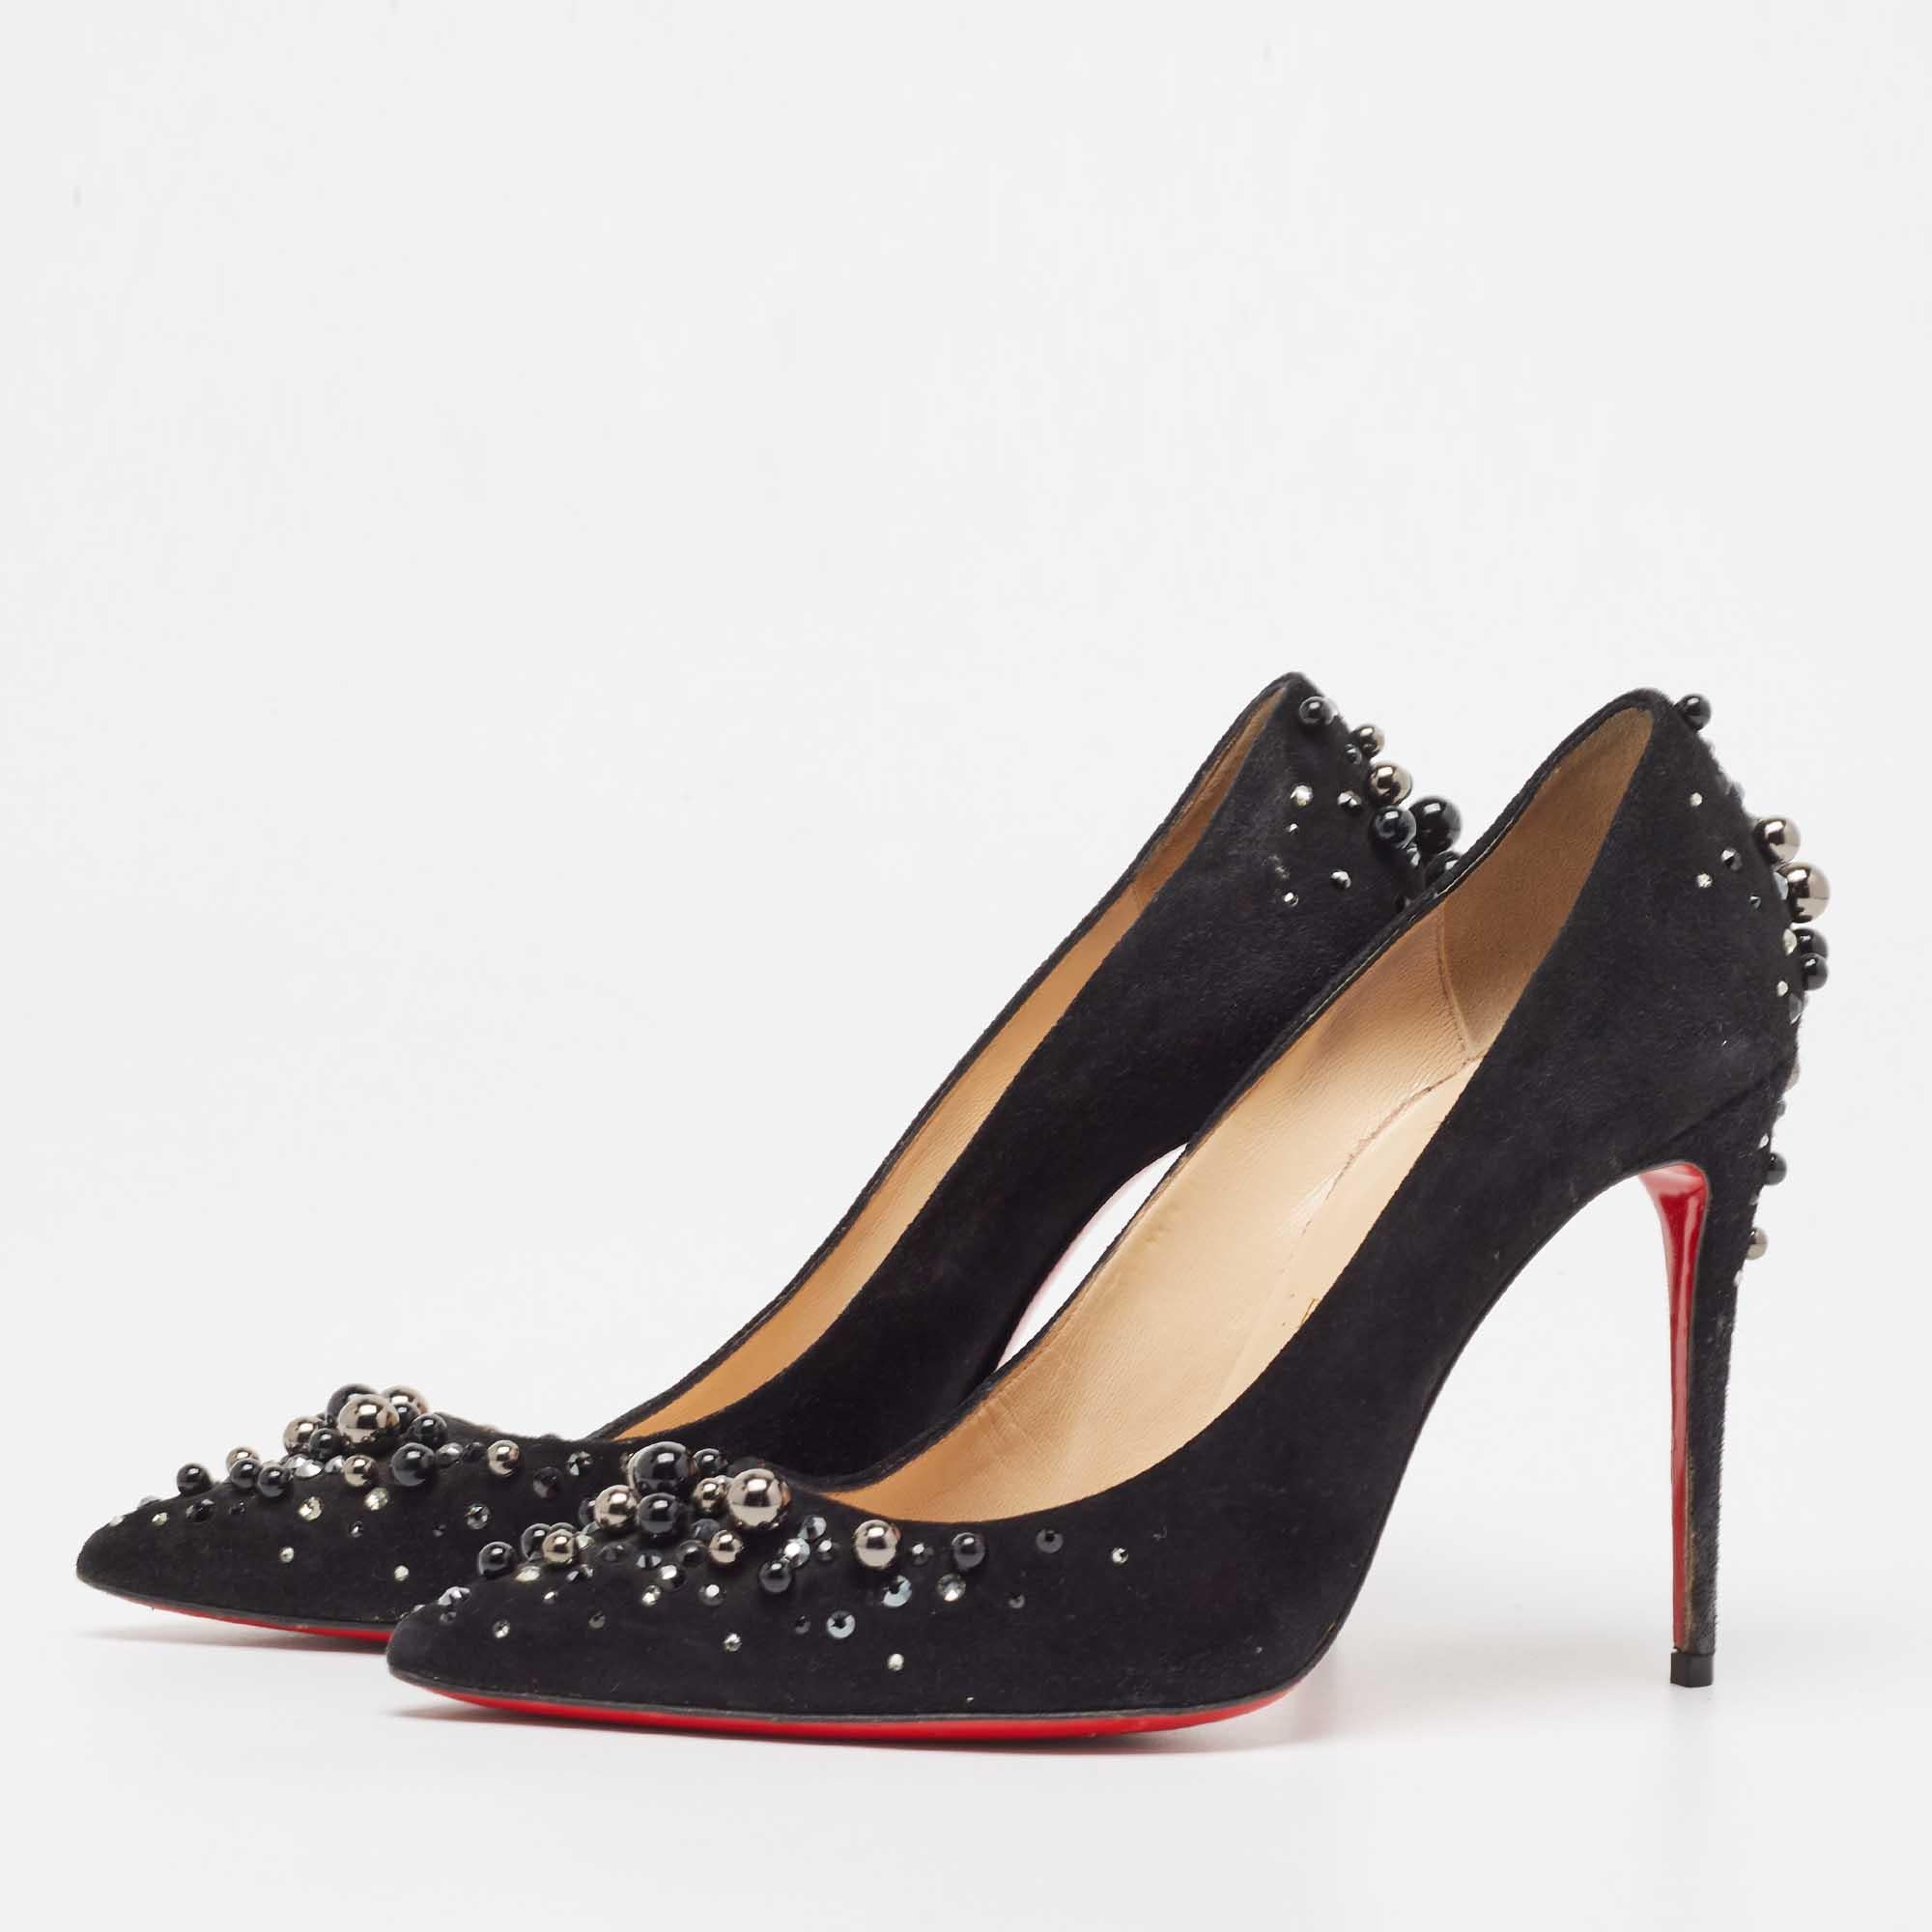 Christian Louboutin Black Suede Candidate Pumps Size 37 For Sale 2